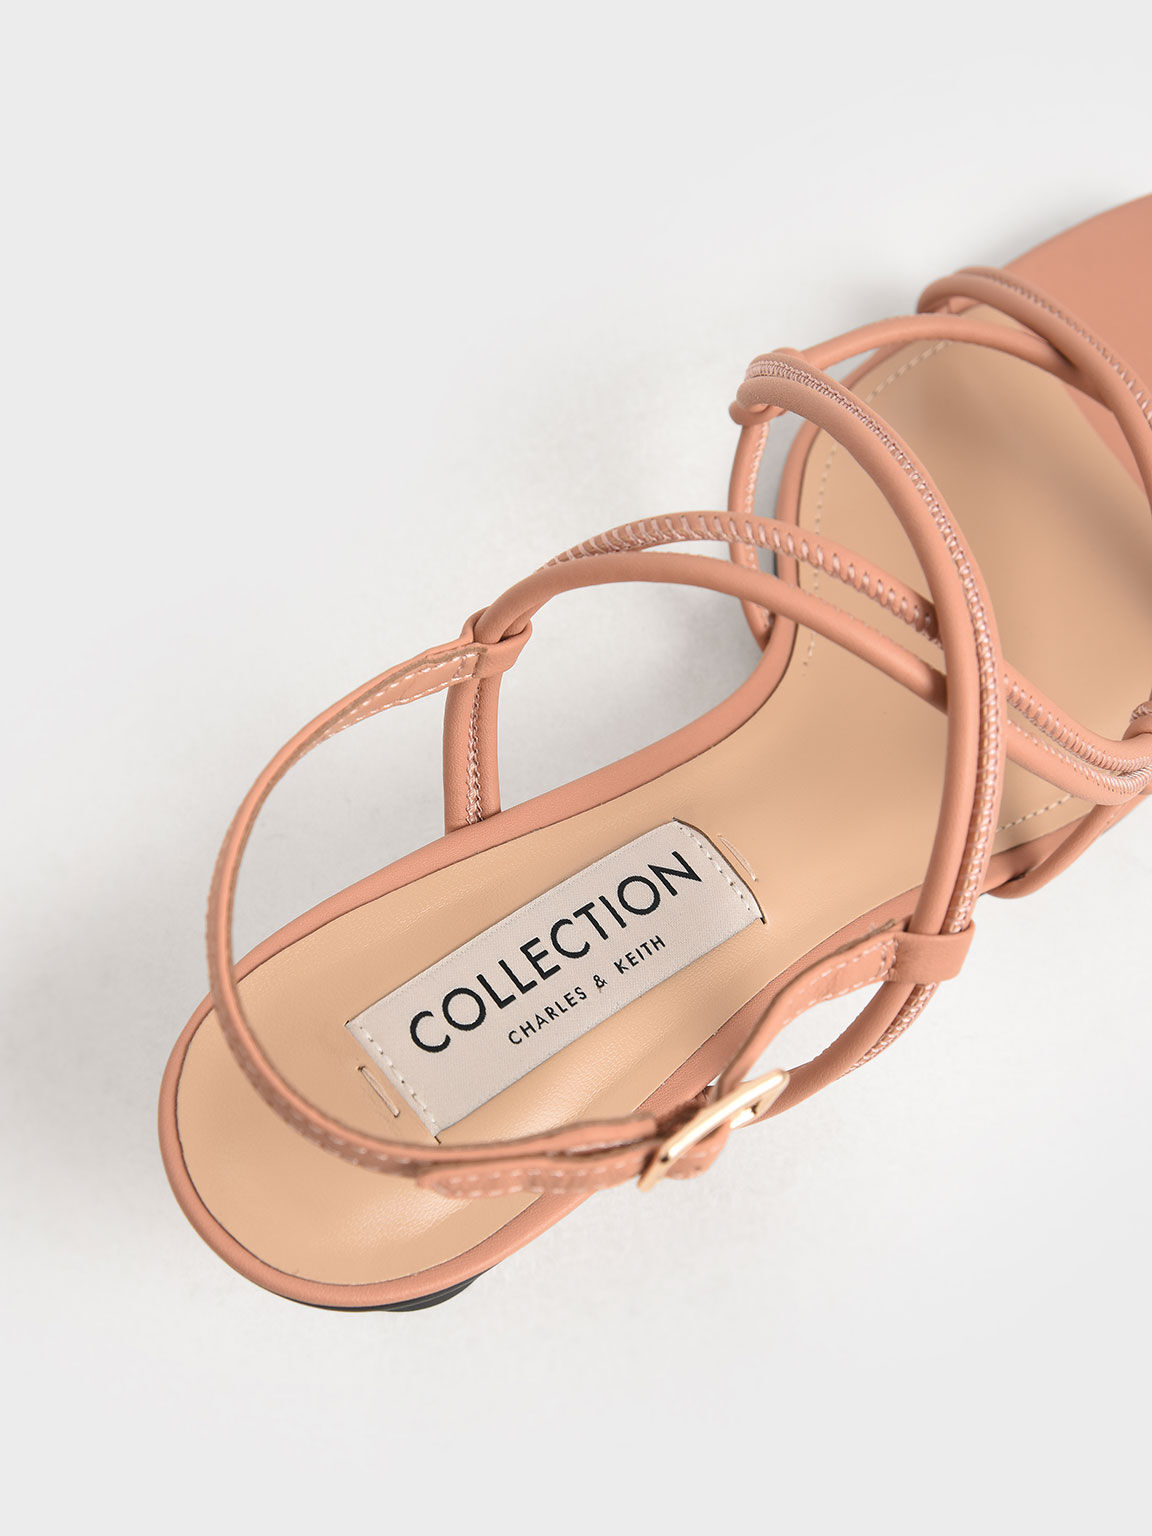 Leather Strappy Knotted Sandals, Tan, hi-res